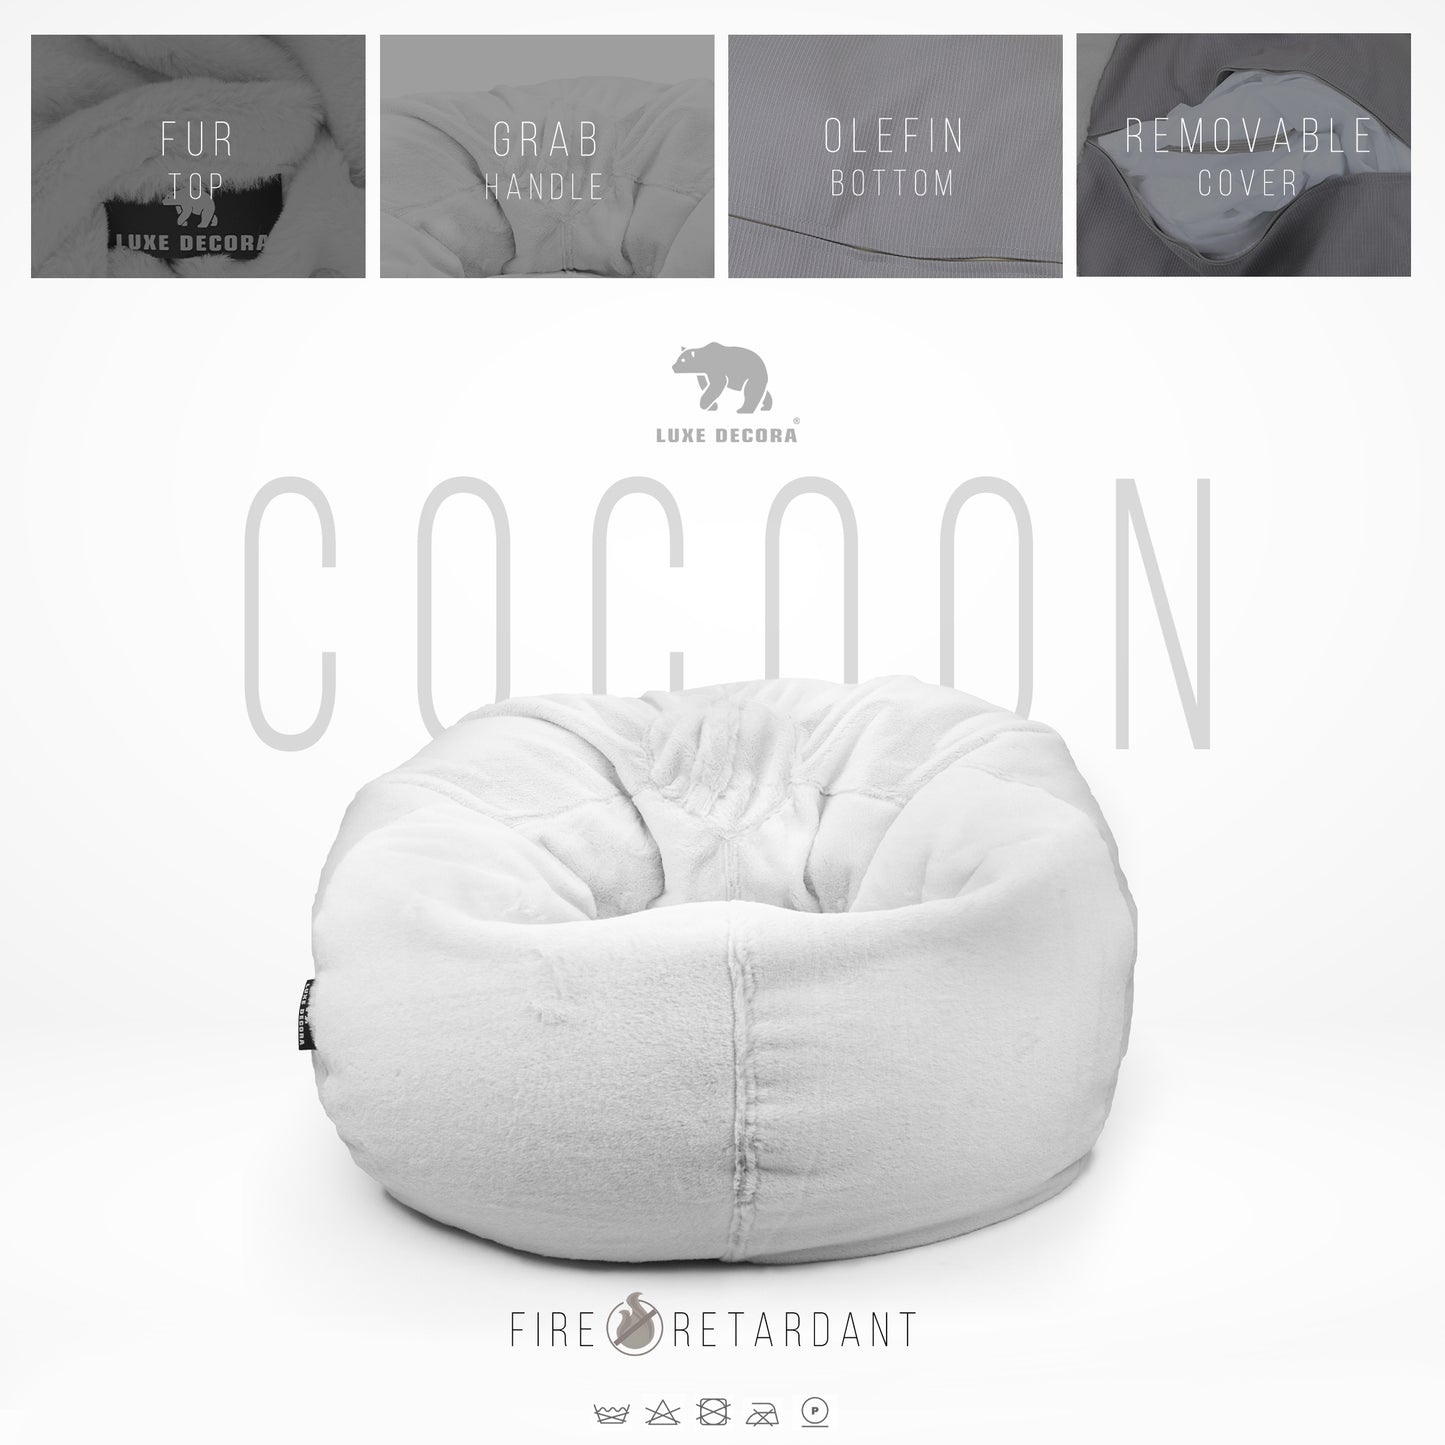 Cocoon - Plush Fur Bean Bag for Ultimate Comfort and Style